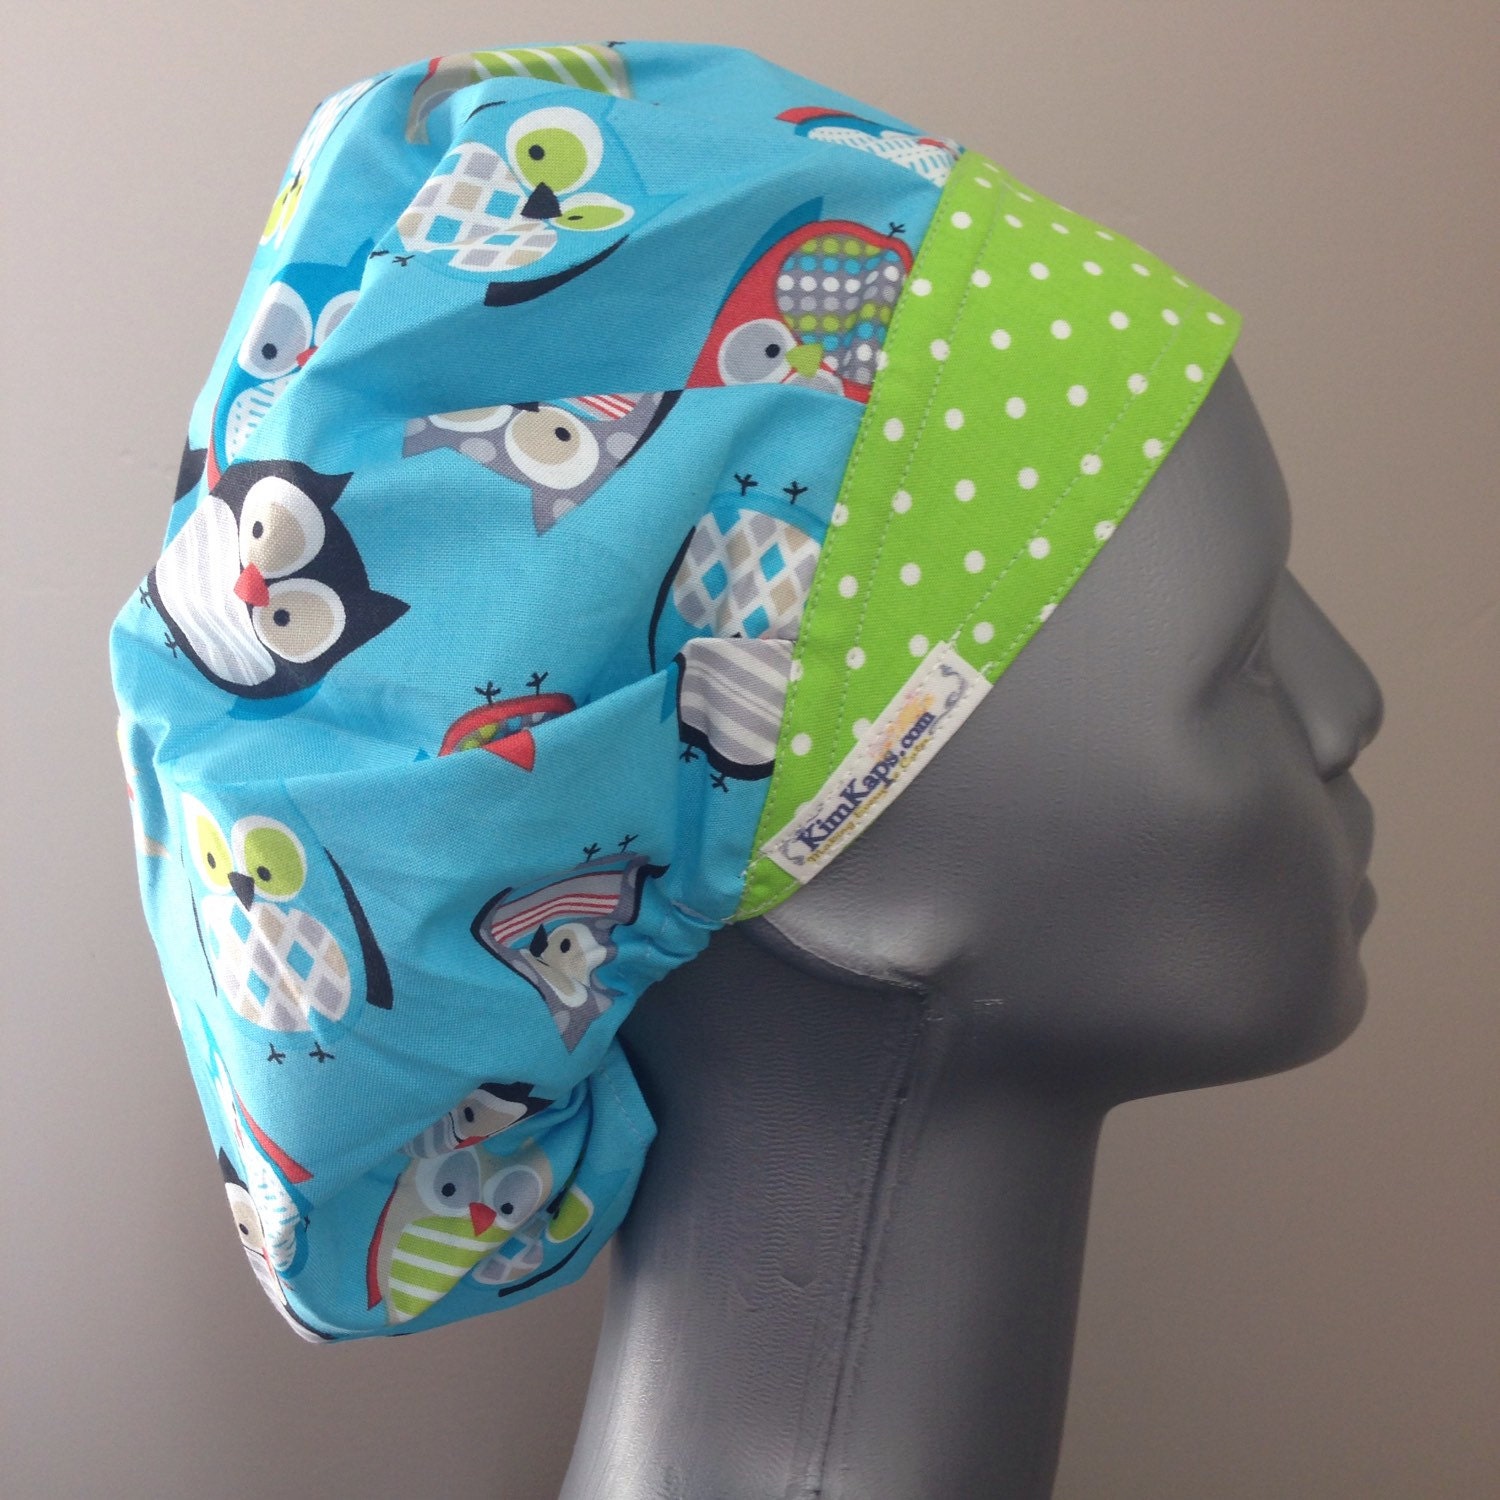 Bouffant Surgical Scrub Cap/ blue fabric with owls and polka